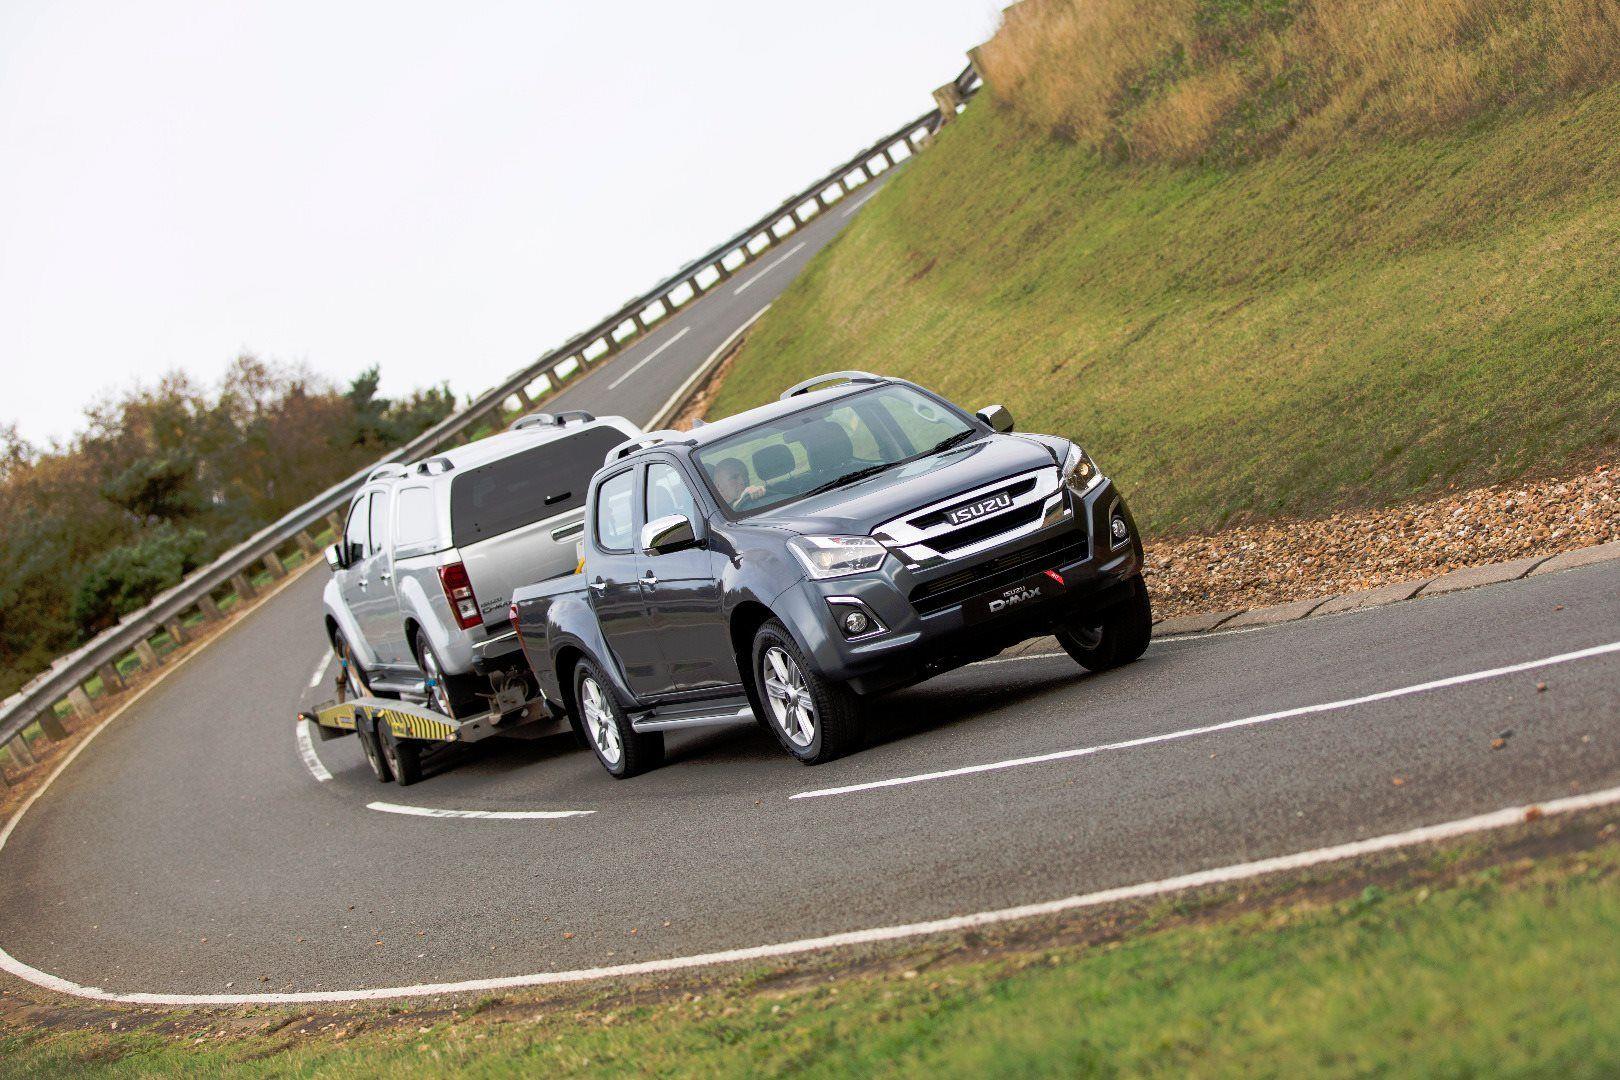 AWARD-WINNING D-MAX BENEFITS WITH ATTRACTIVE OFFERS ACROSS THE RANGE